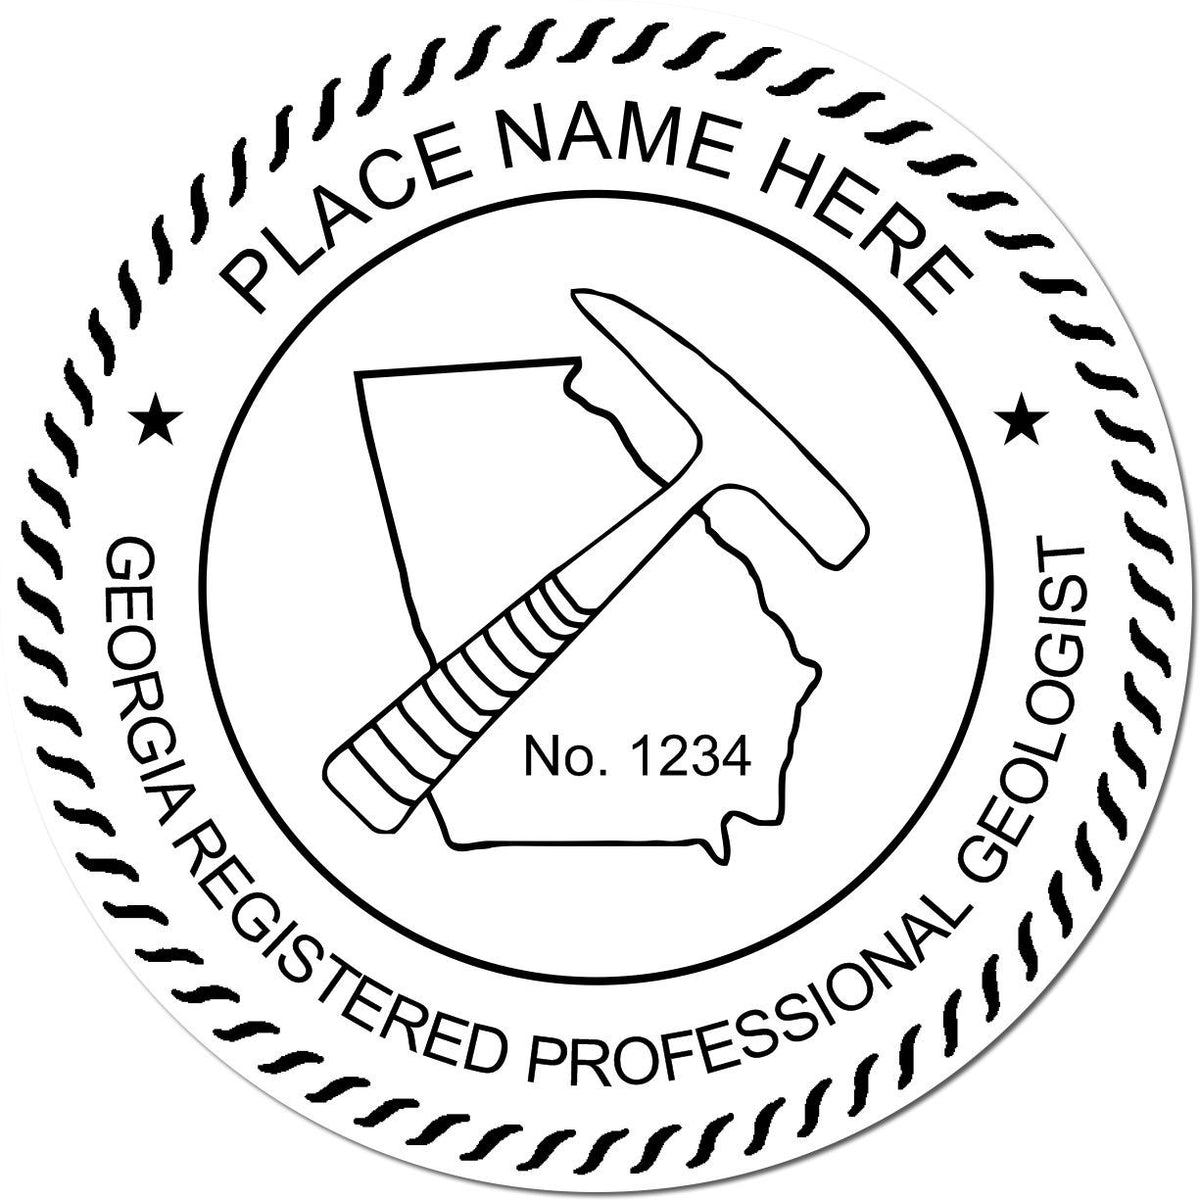 An alternative view of the Premium MaxLight Pre-Inked Georgia Geology Stamp stamped on a sheet of paper showing the image in use